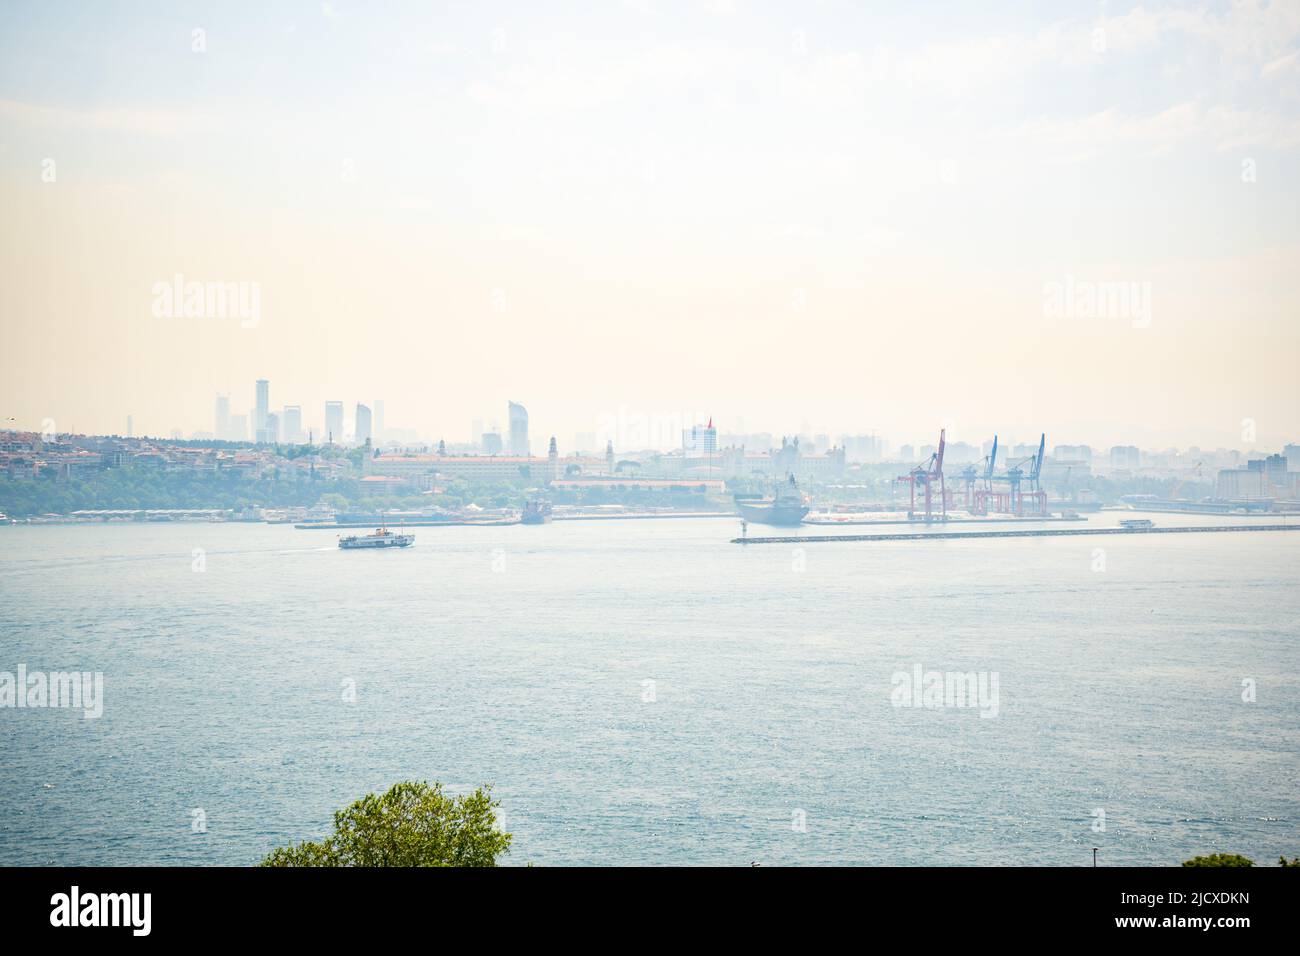 Panoramic view of Asian side or anatolian side of Istanbul including Kadikoy and Uskudar districts from Topkapi Palace. Stock Photo